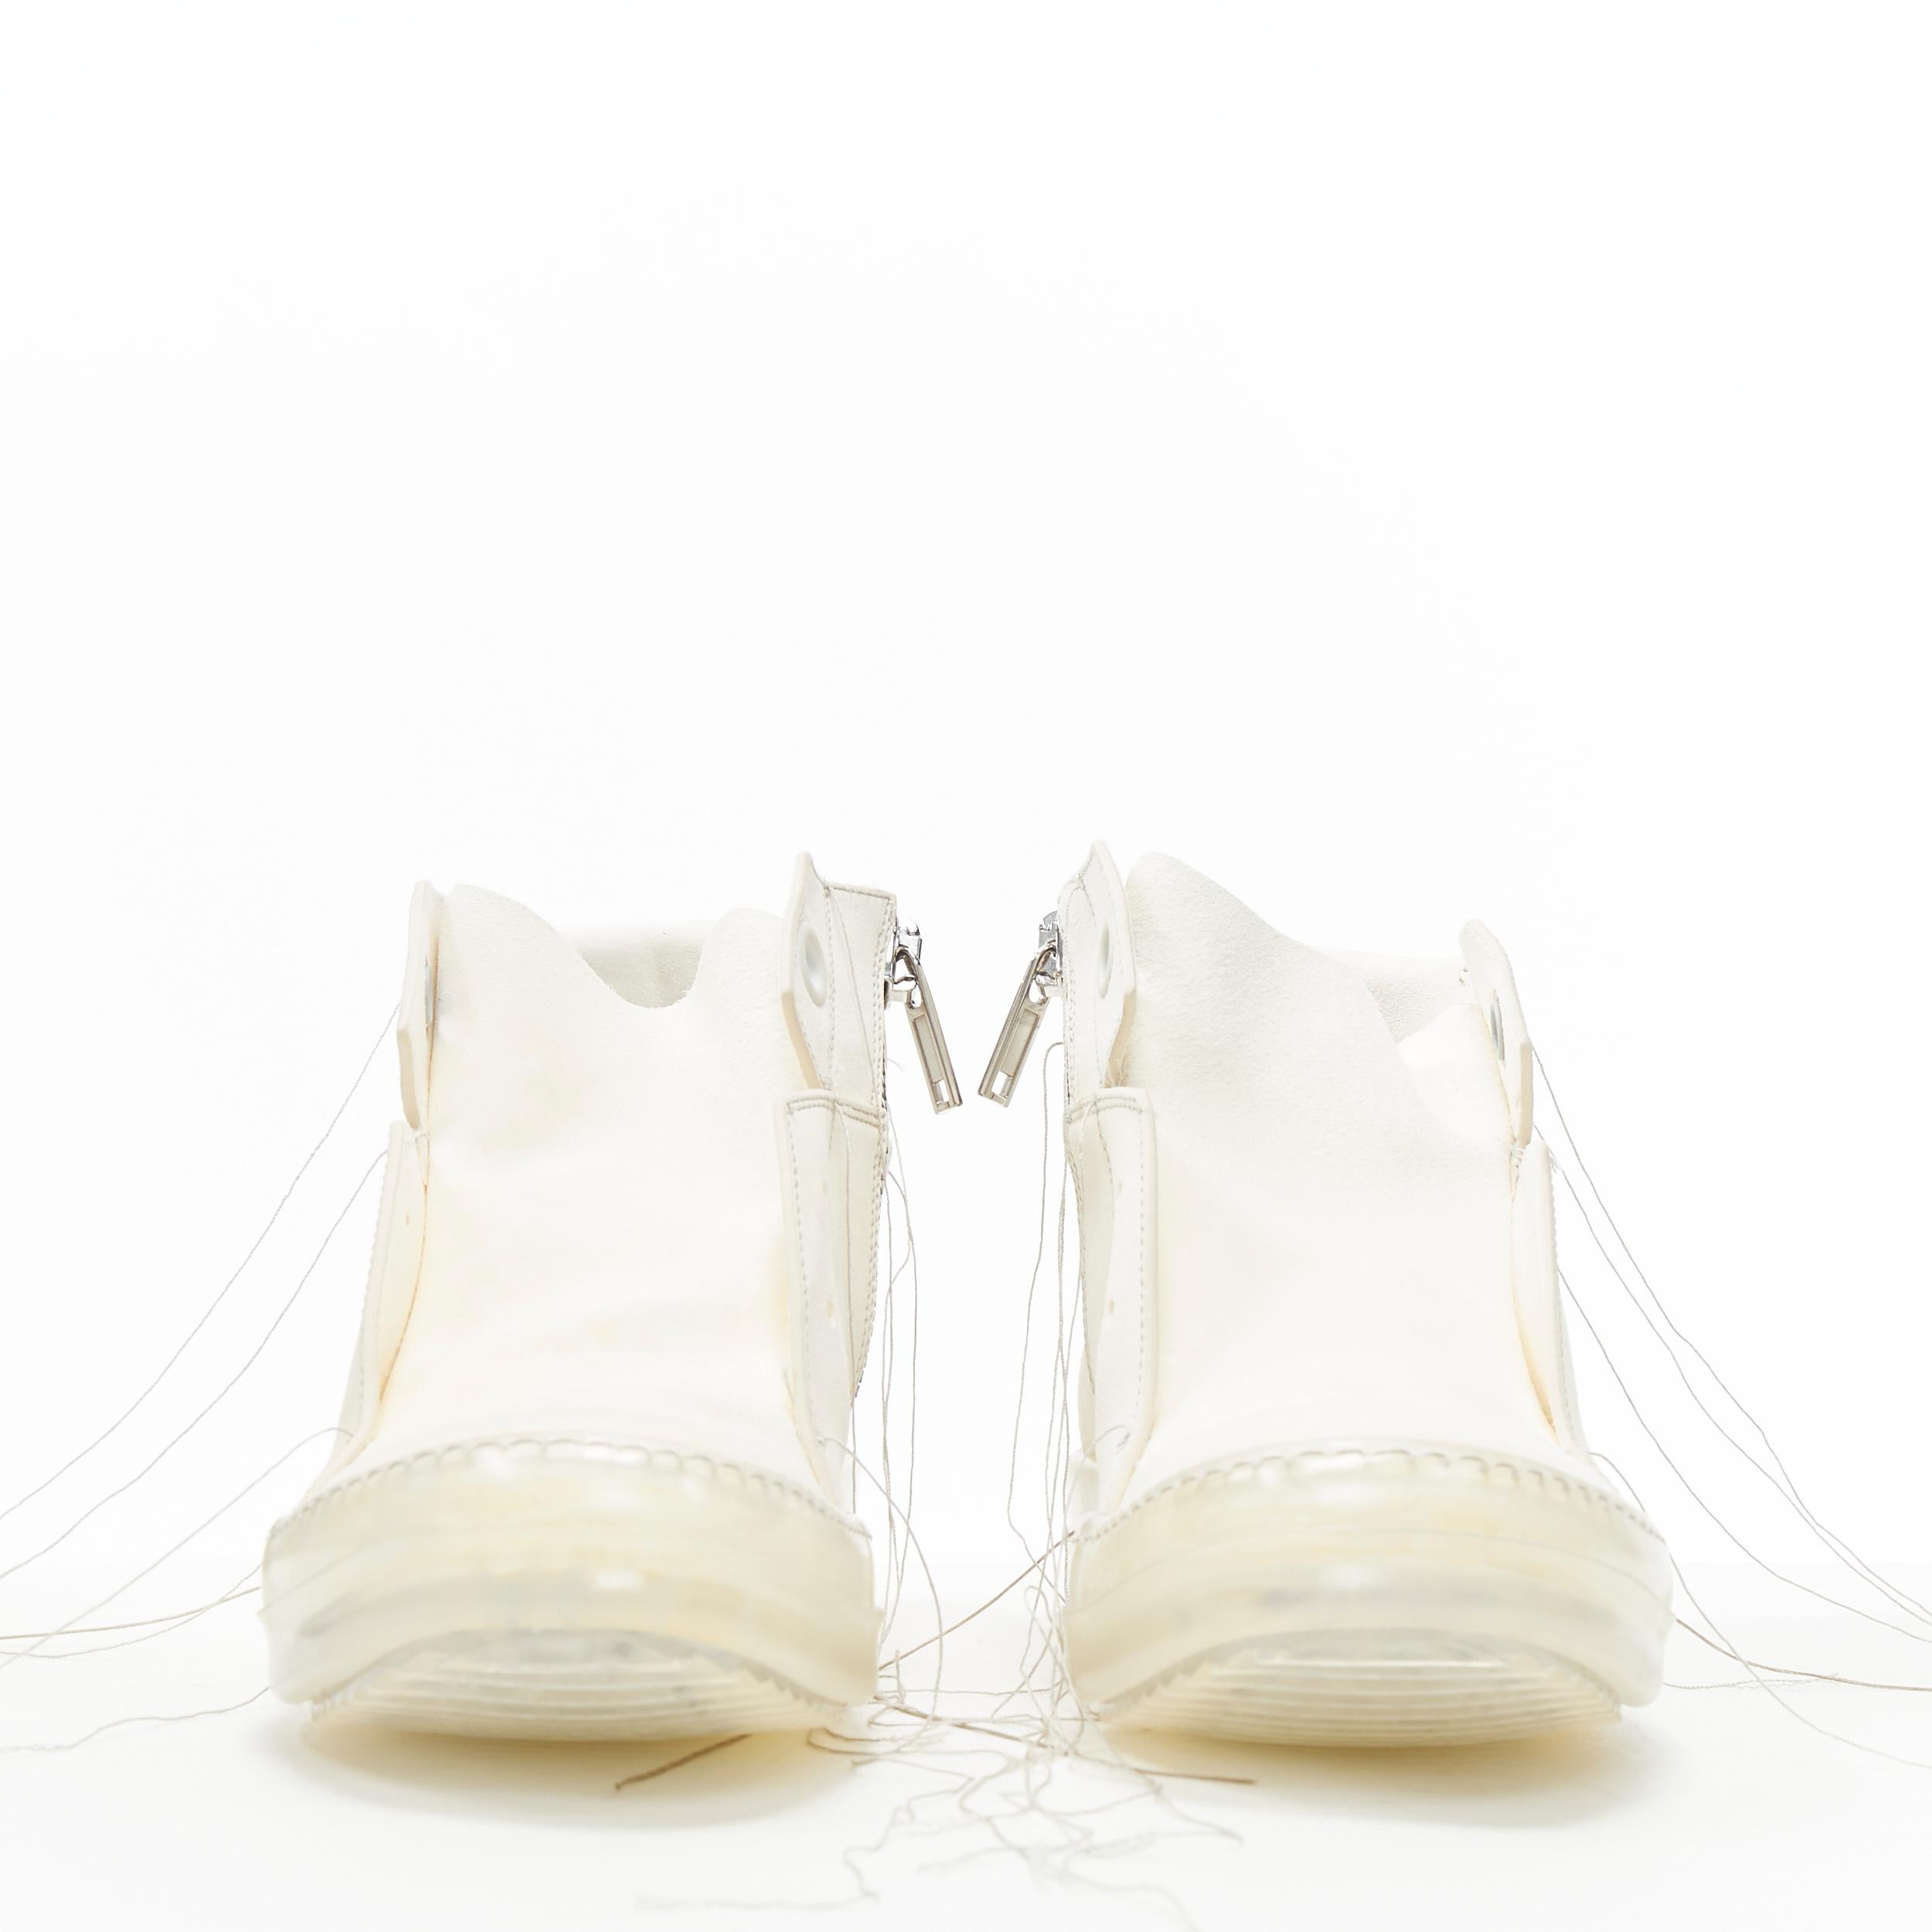 rick owens clear sole